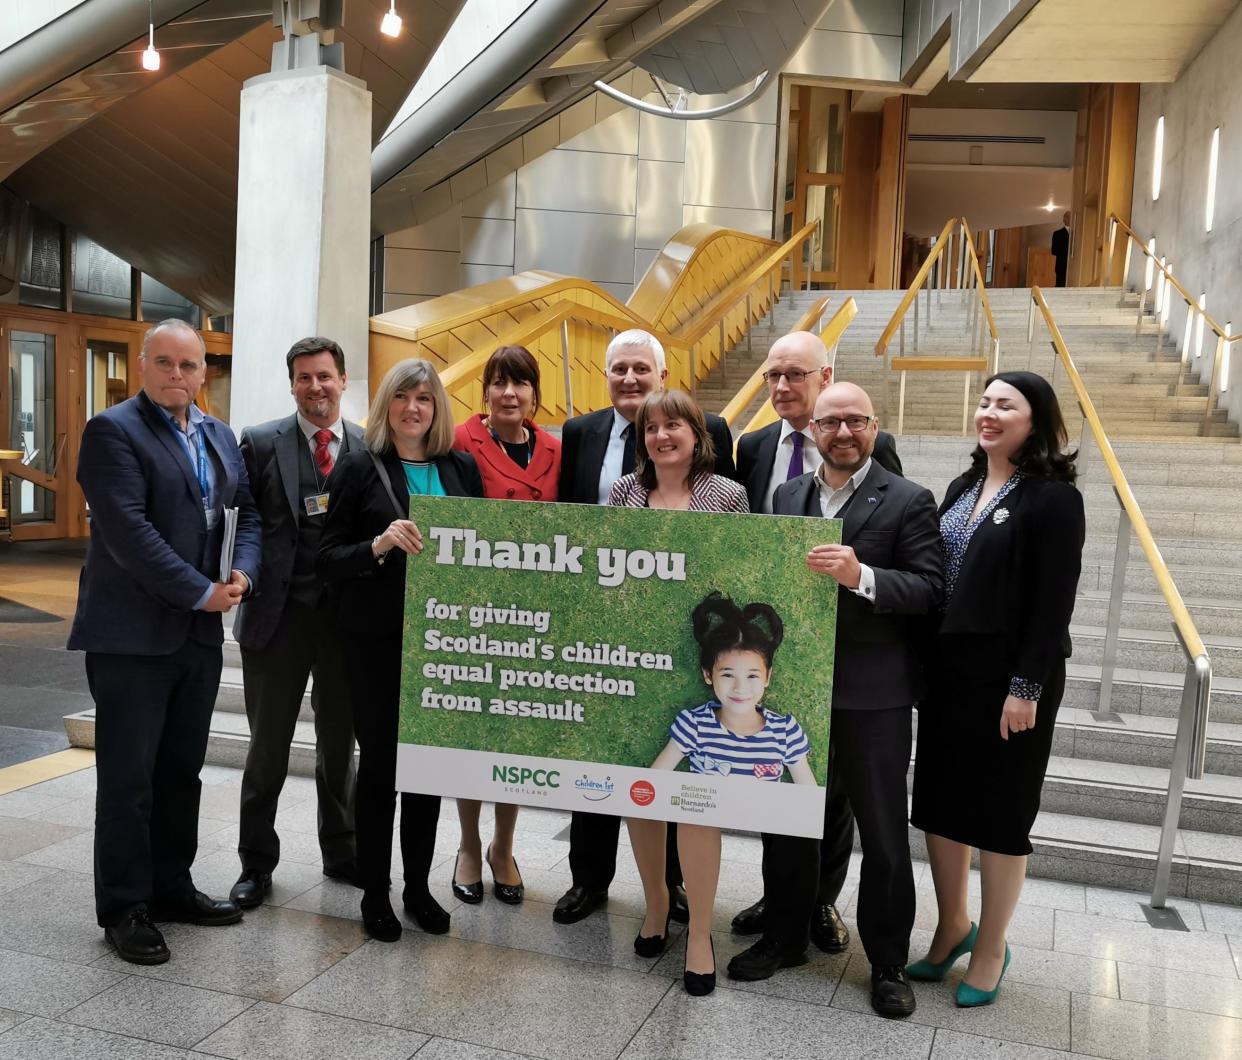 MSPs in Scottish Parliament, Edinburgh, celebrating the passing of the Children (Equal Protection from Assault) (Scotland) Bill, which means a ban on smacking of children in Scotland.